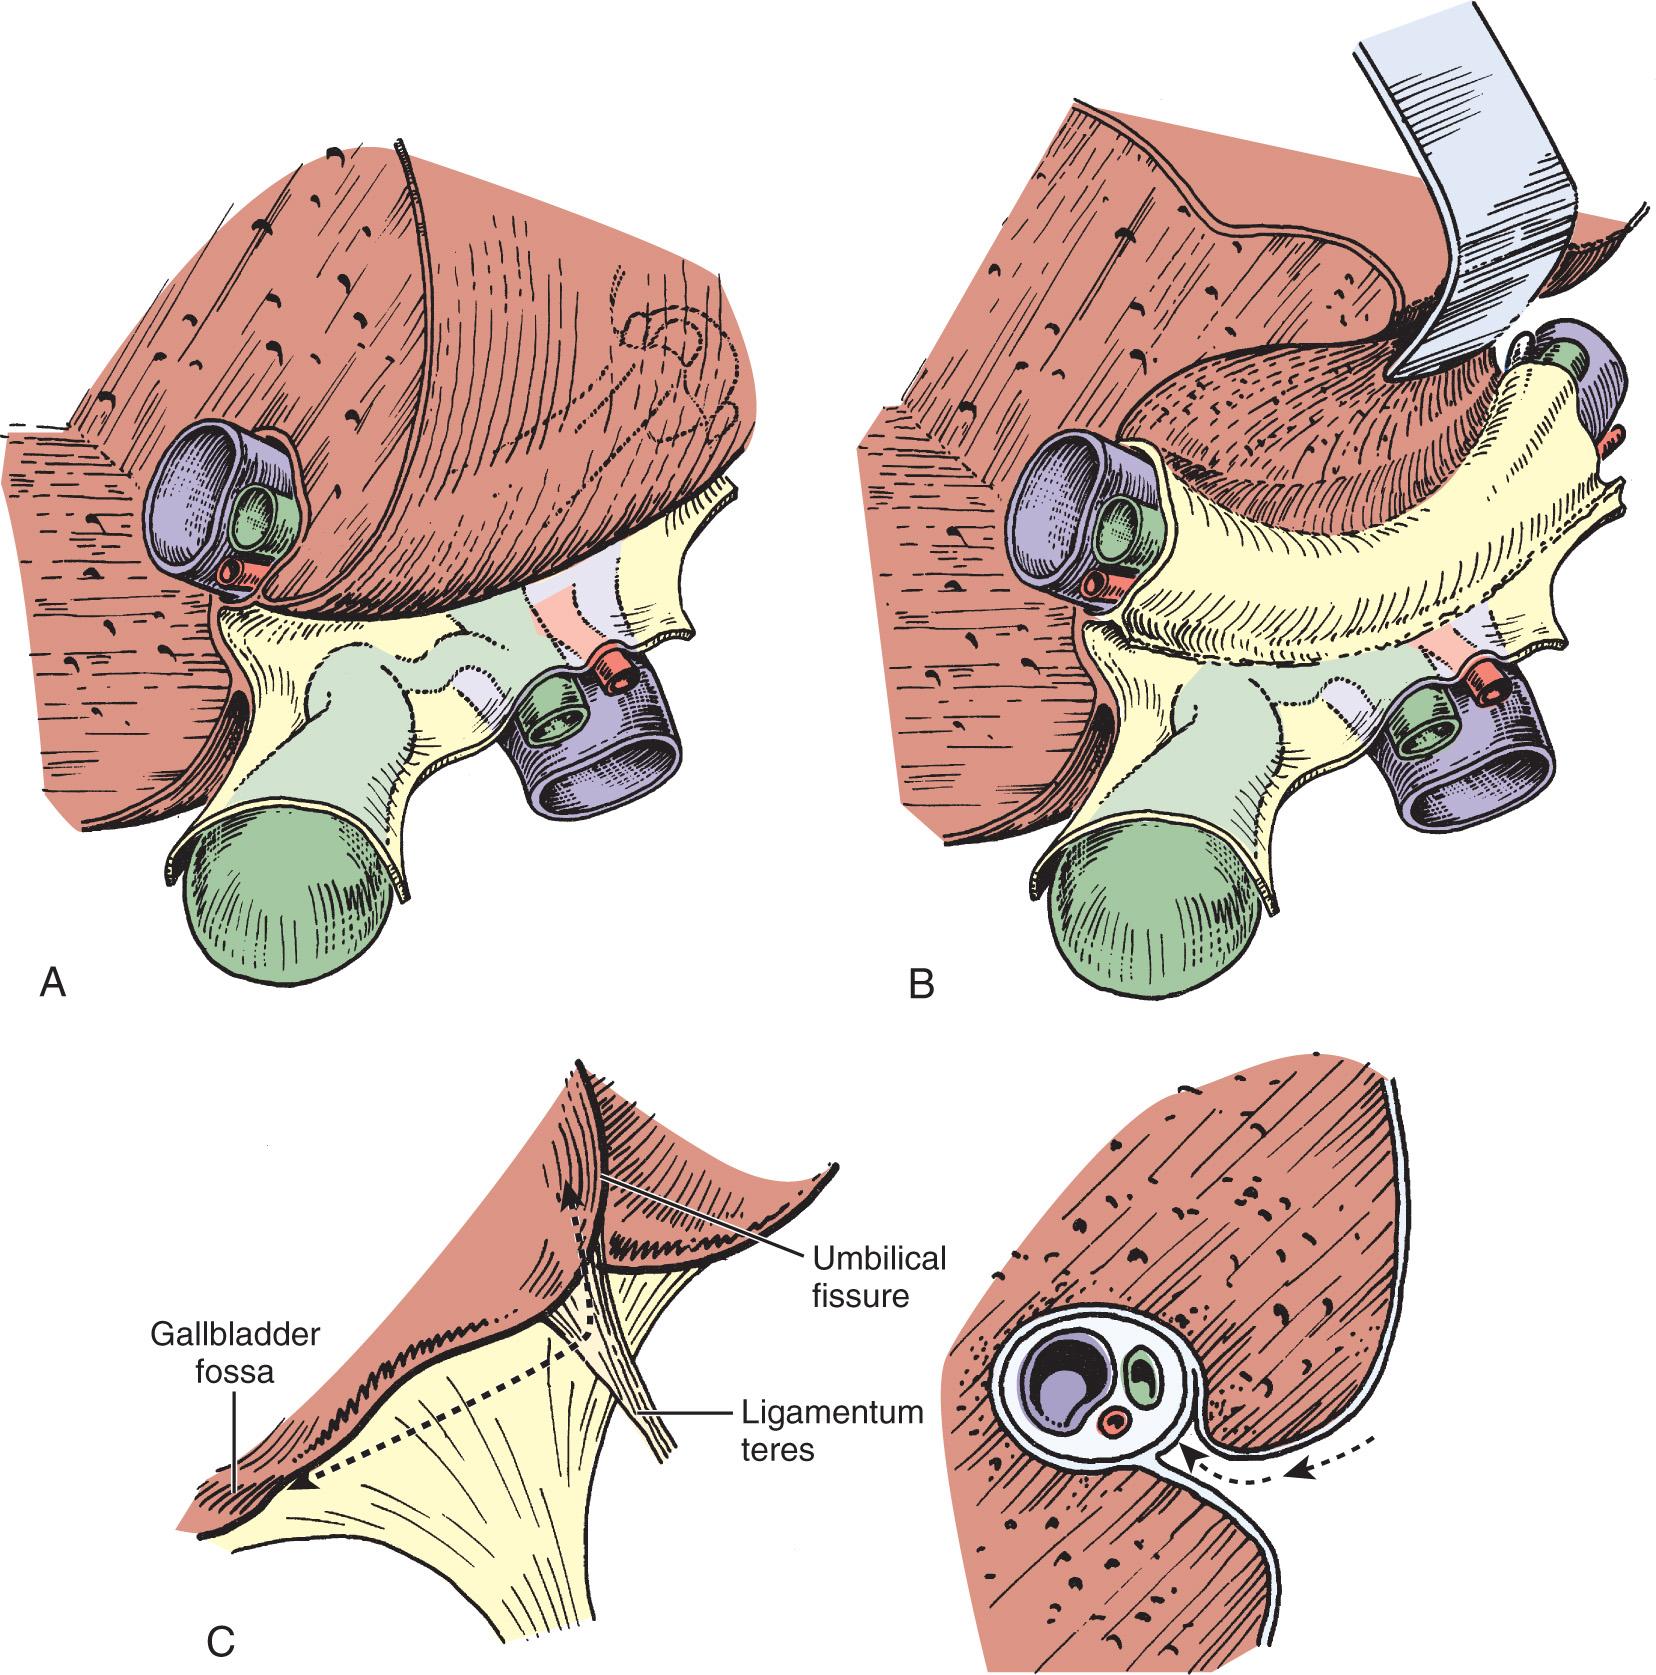 FIGURE 172.2, (A) Relationship between the posterior aspect of the quadrate lobe and the biliary confluence. The hilar plate is formed by the fusion of the connective tissue enclosing the biliary and vascular elements with Glisson capsule. (B) Biliary confluence and left hepatic duct exposed by lifting the quadrate lobe upward after incision of Glisson capsule at its base. This technique (lowering of the hilar plate) generally is used to display a dilated bile duct above an iatrogenic stricture or hilar cholangiocarcinoma. (C) Line of incision (left) to allow extensive mobilization of the quadrate lobe. This maneuver is of particular value for high bile duct stricture and in the presence of liver atrophy or hypertrophy. The procedure consists of lifting the quadrate lobe upward (see [A] and [B]), then not only opening the umbilical fissure, but also incising the deepest portion of the gallbladder fossa. Right, Incision of Glisson capsule to gain access to the biliary system (arrow).